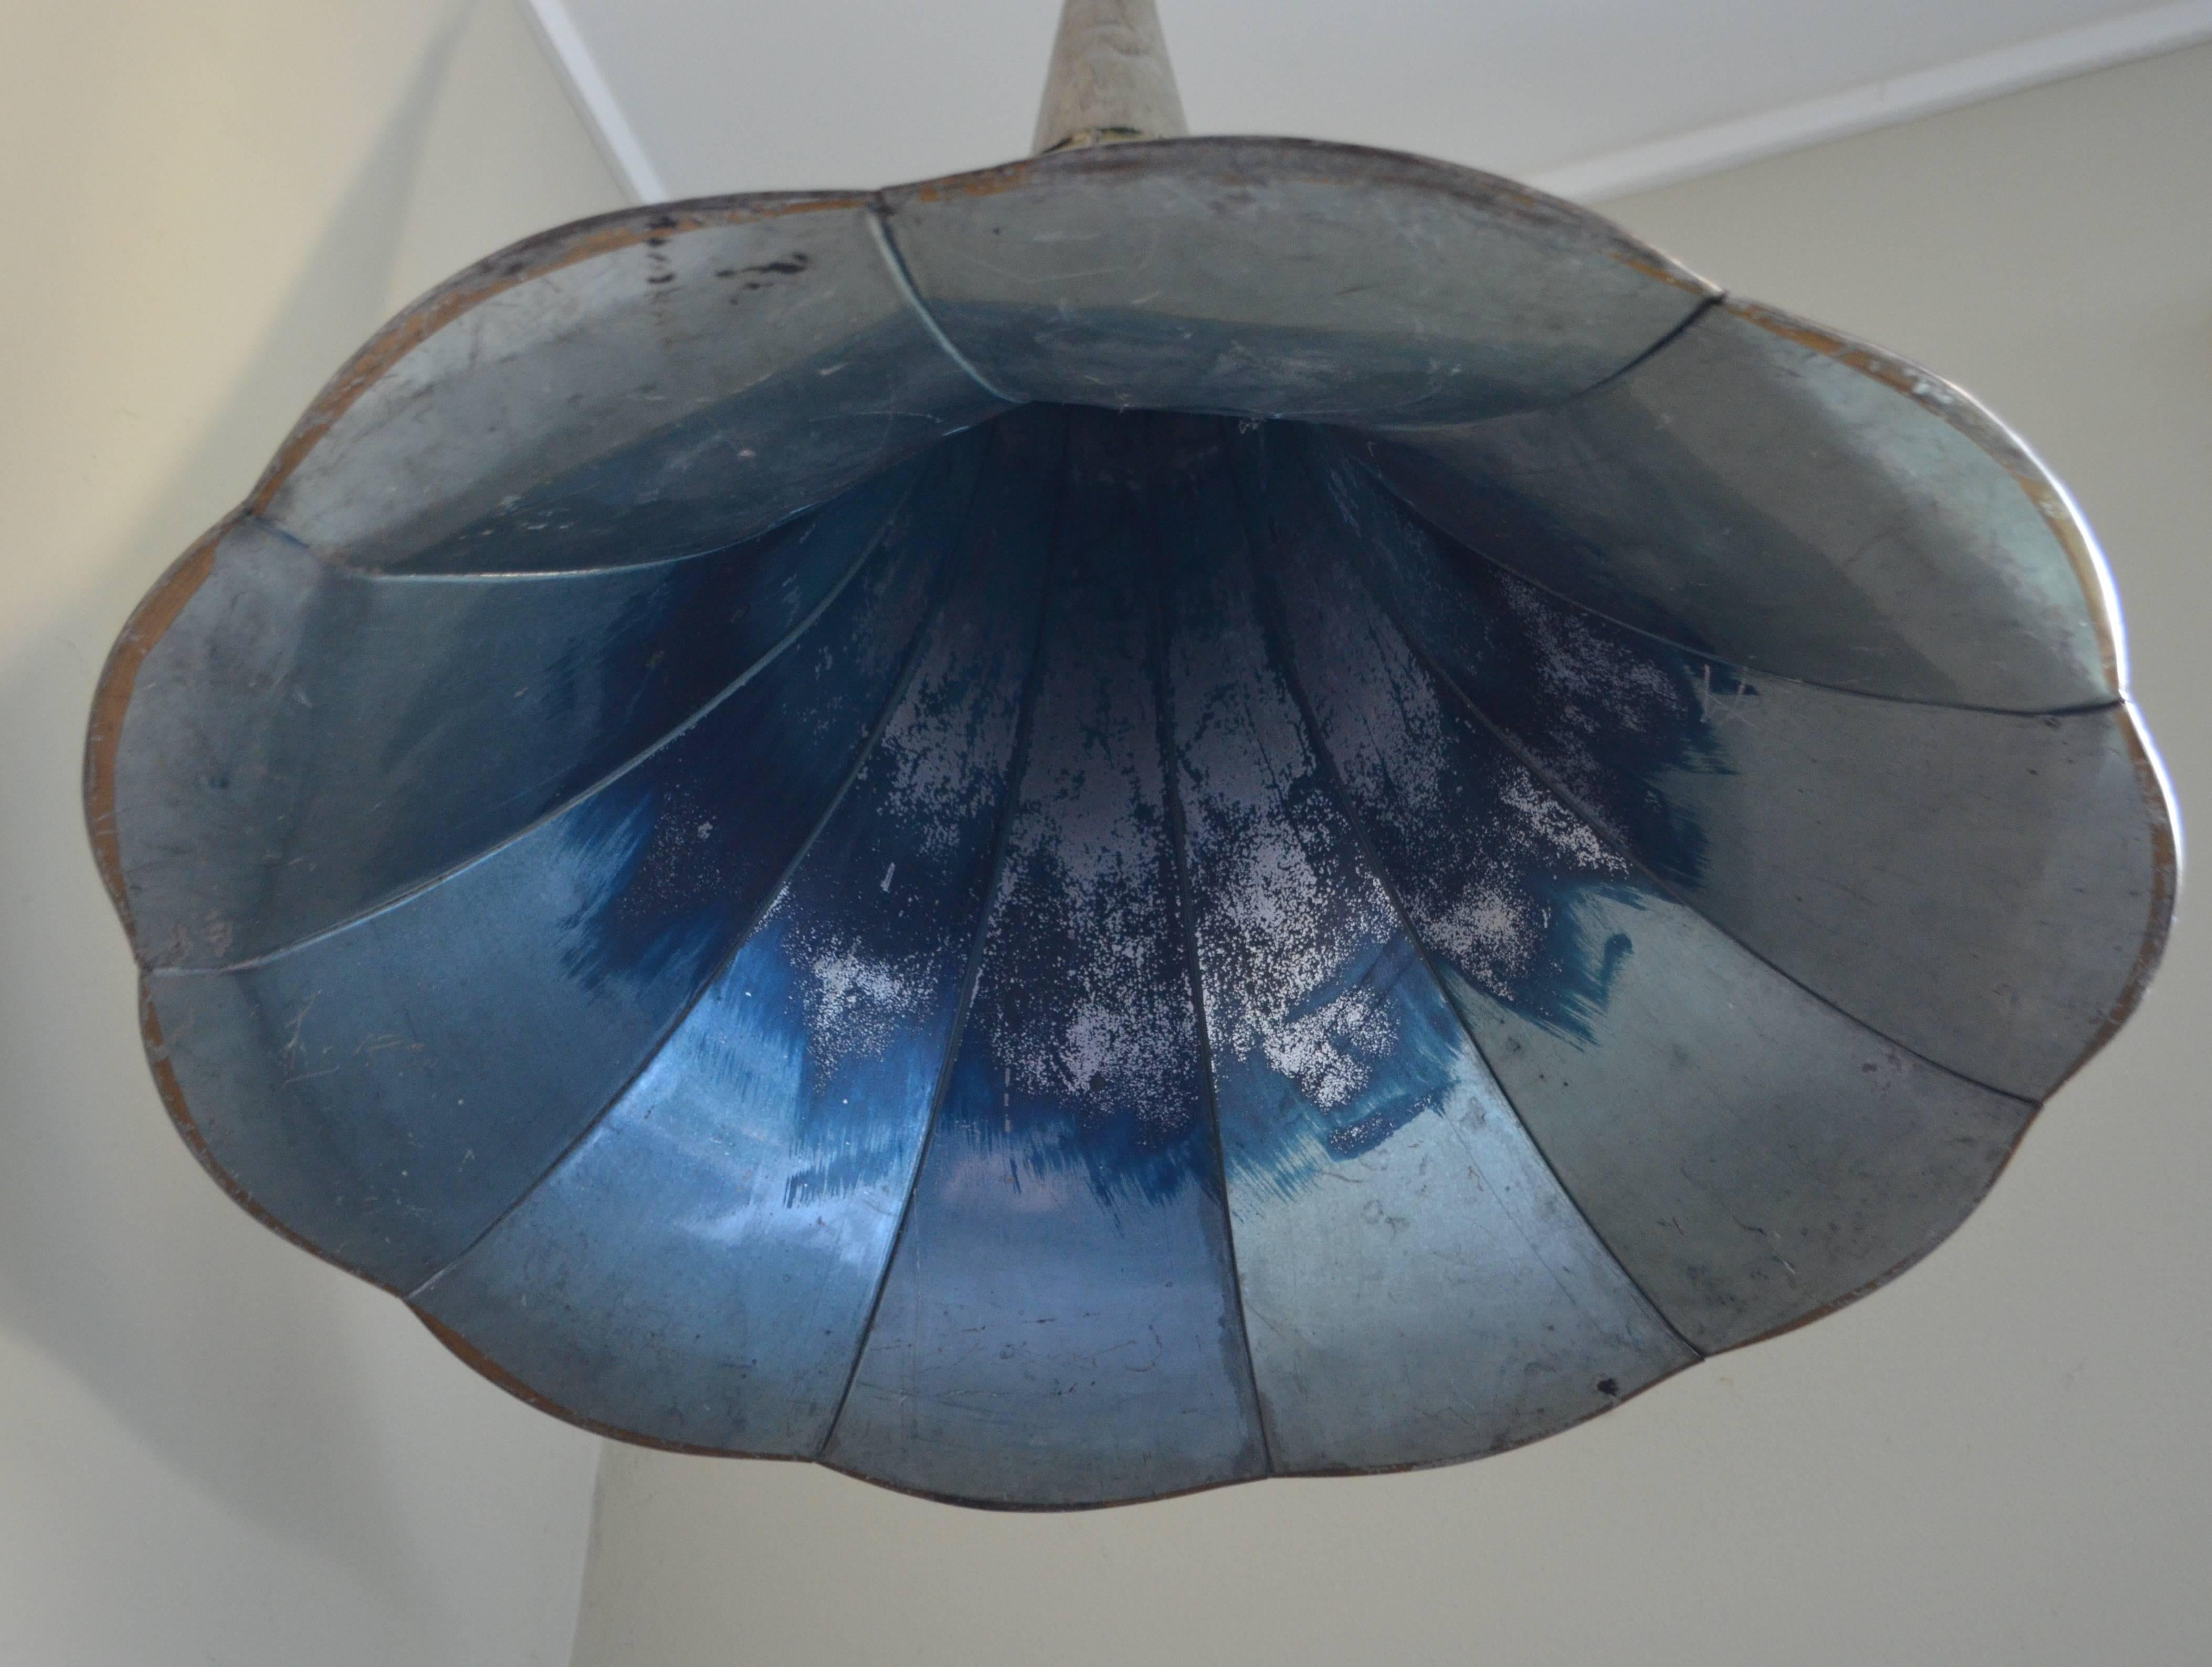 Pendant light has been made from an antique gramophone Horn. Silver outside with nuances of blue inside. Professionally wired with grounded porcelain socket and black pendant wire. Includes modern steel ceiling canopy and strain relief for wiring